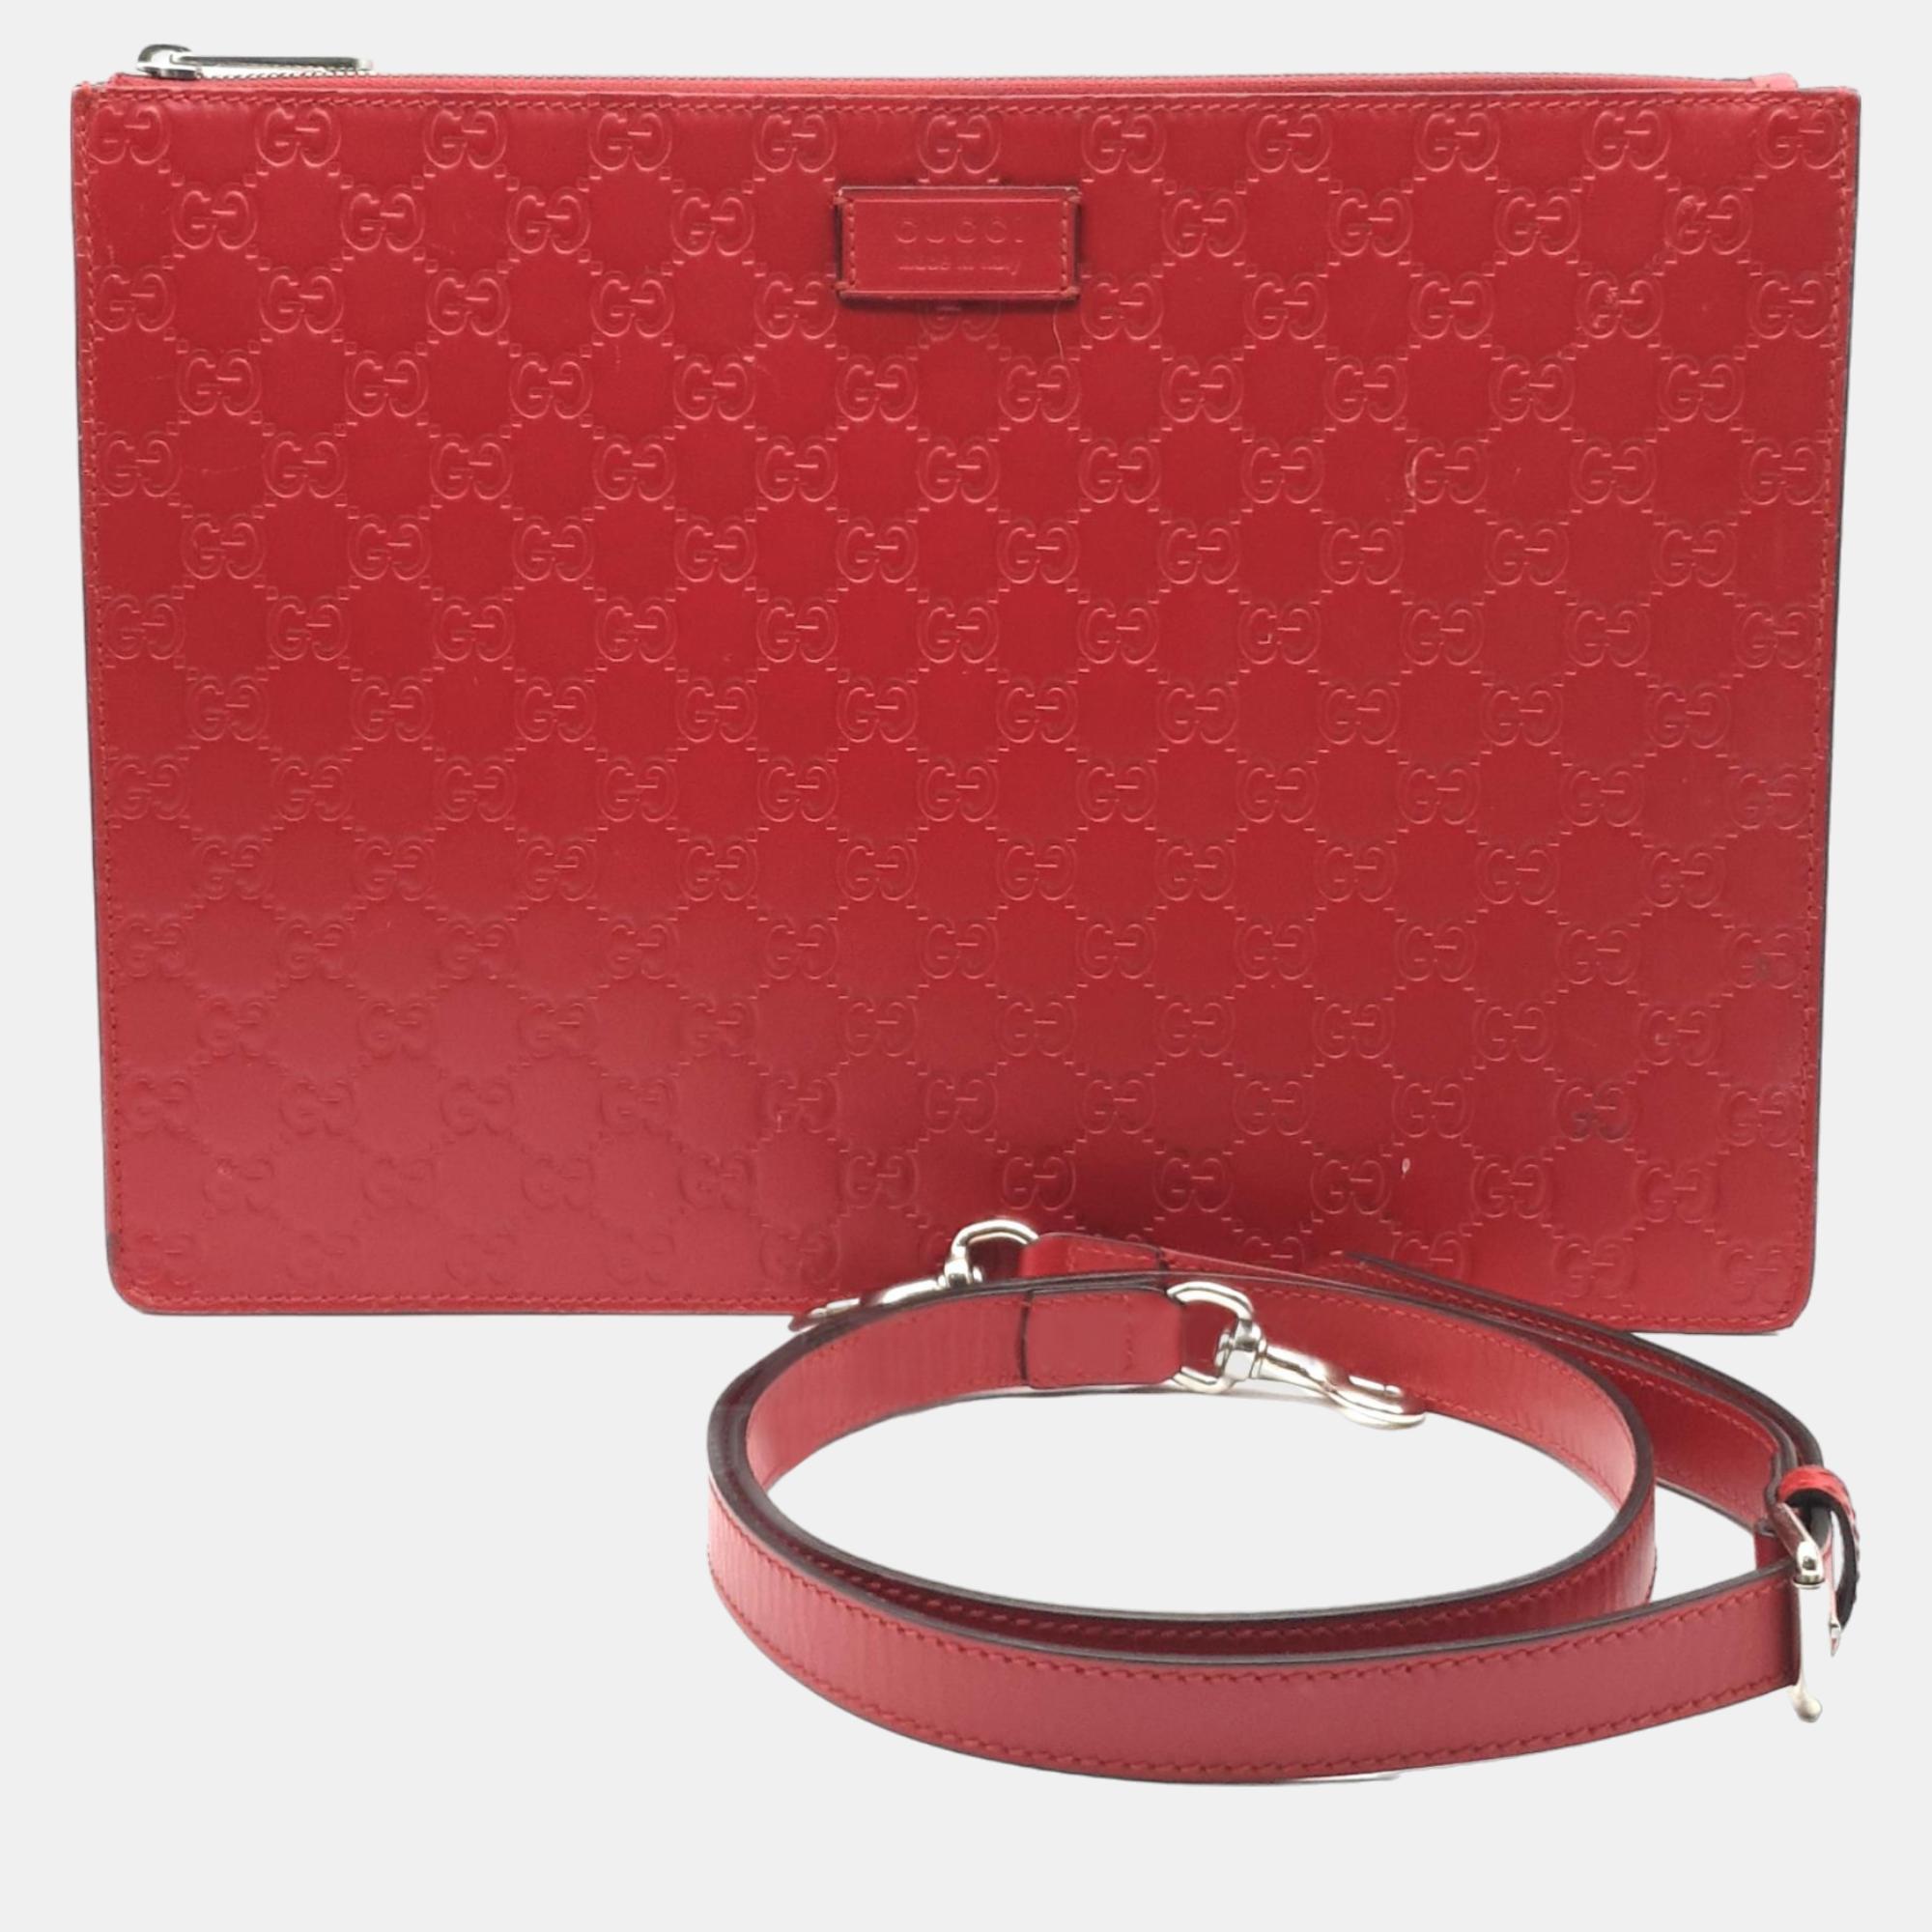 Pre-owned Gucci Red Leather Clutch Bag